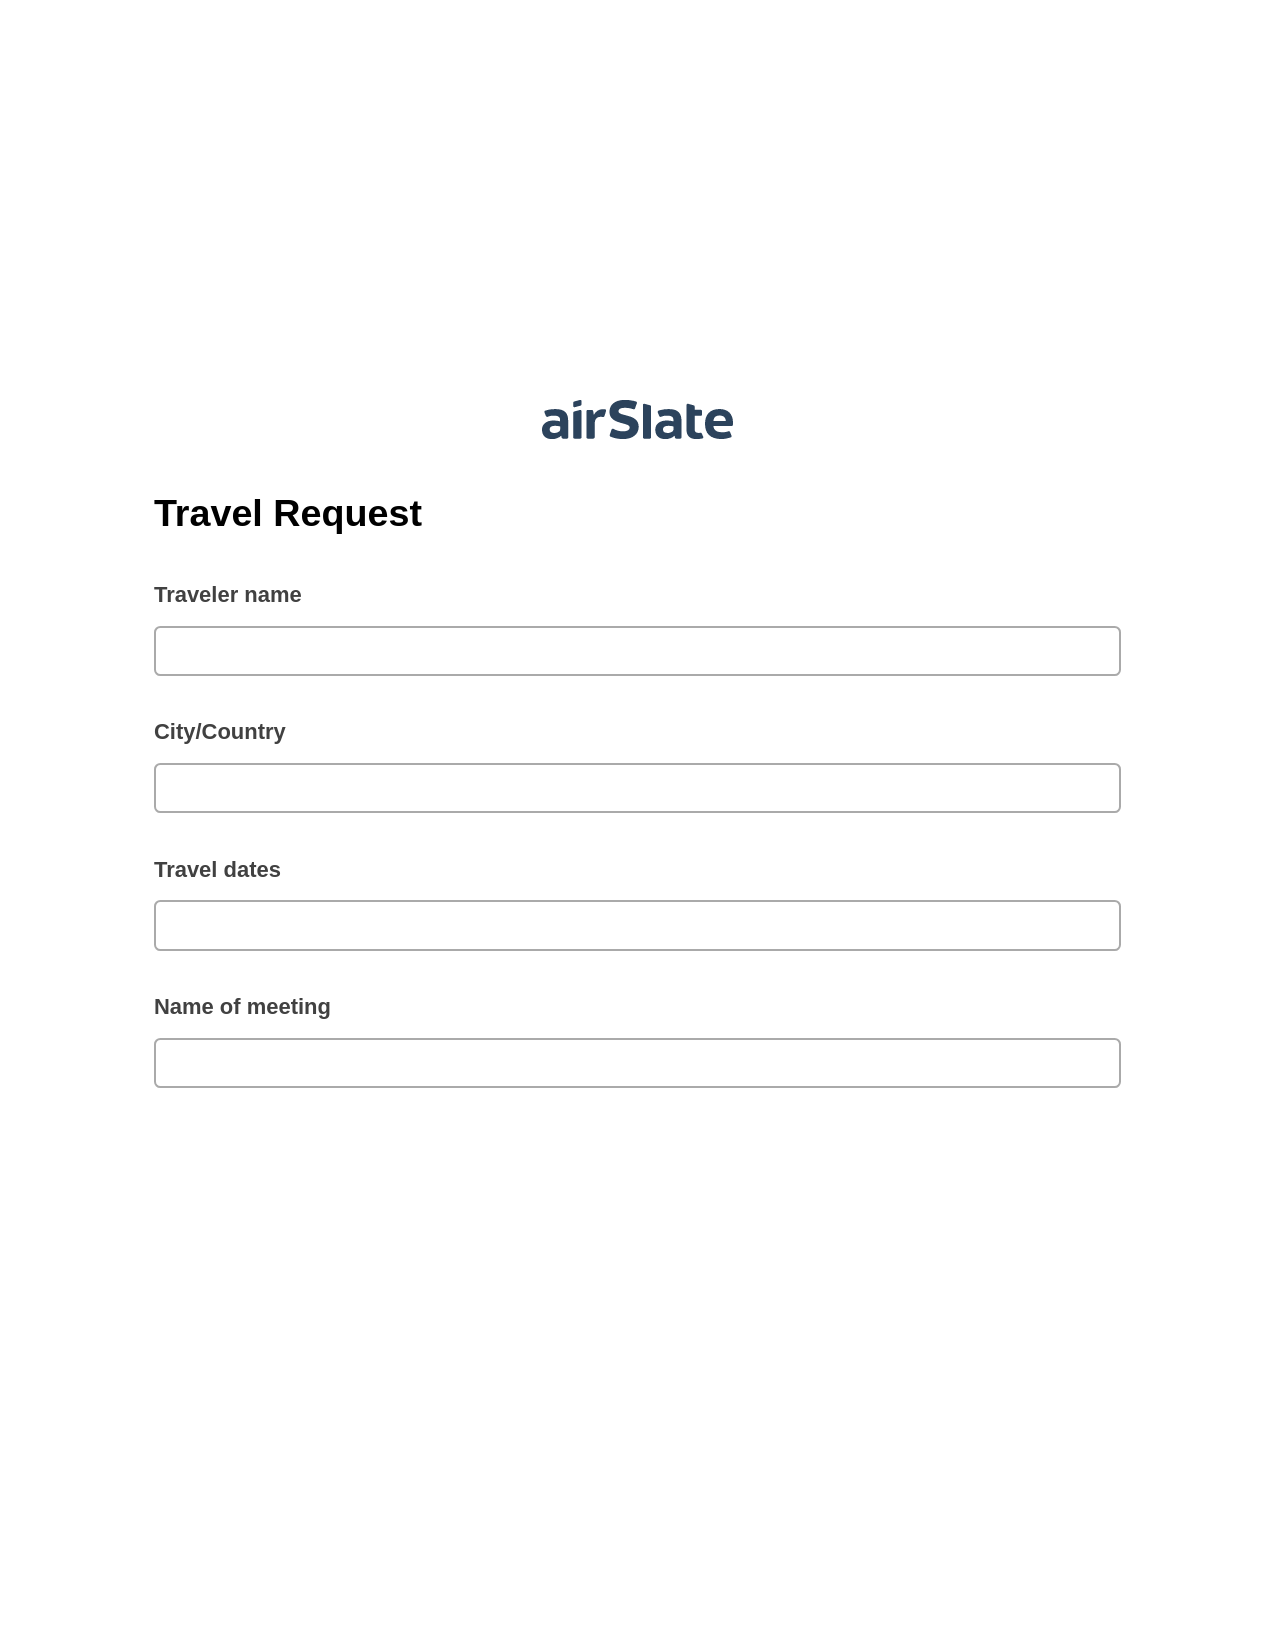 Travel Request Pre-fill Slate from MS Dynamics 365 Records Bot, Invoke Salesforce Process Bot, Export to Excel 365 Bot